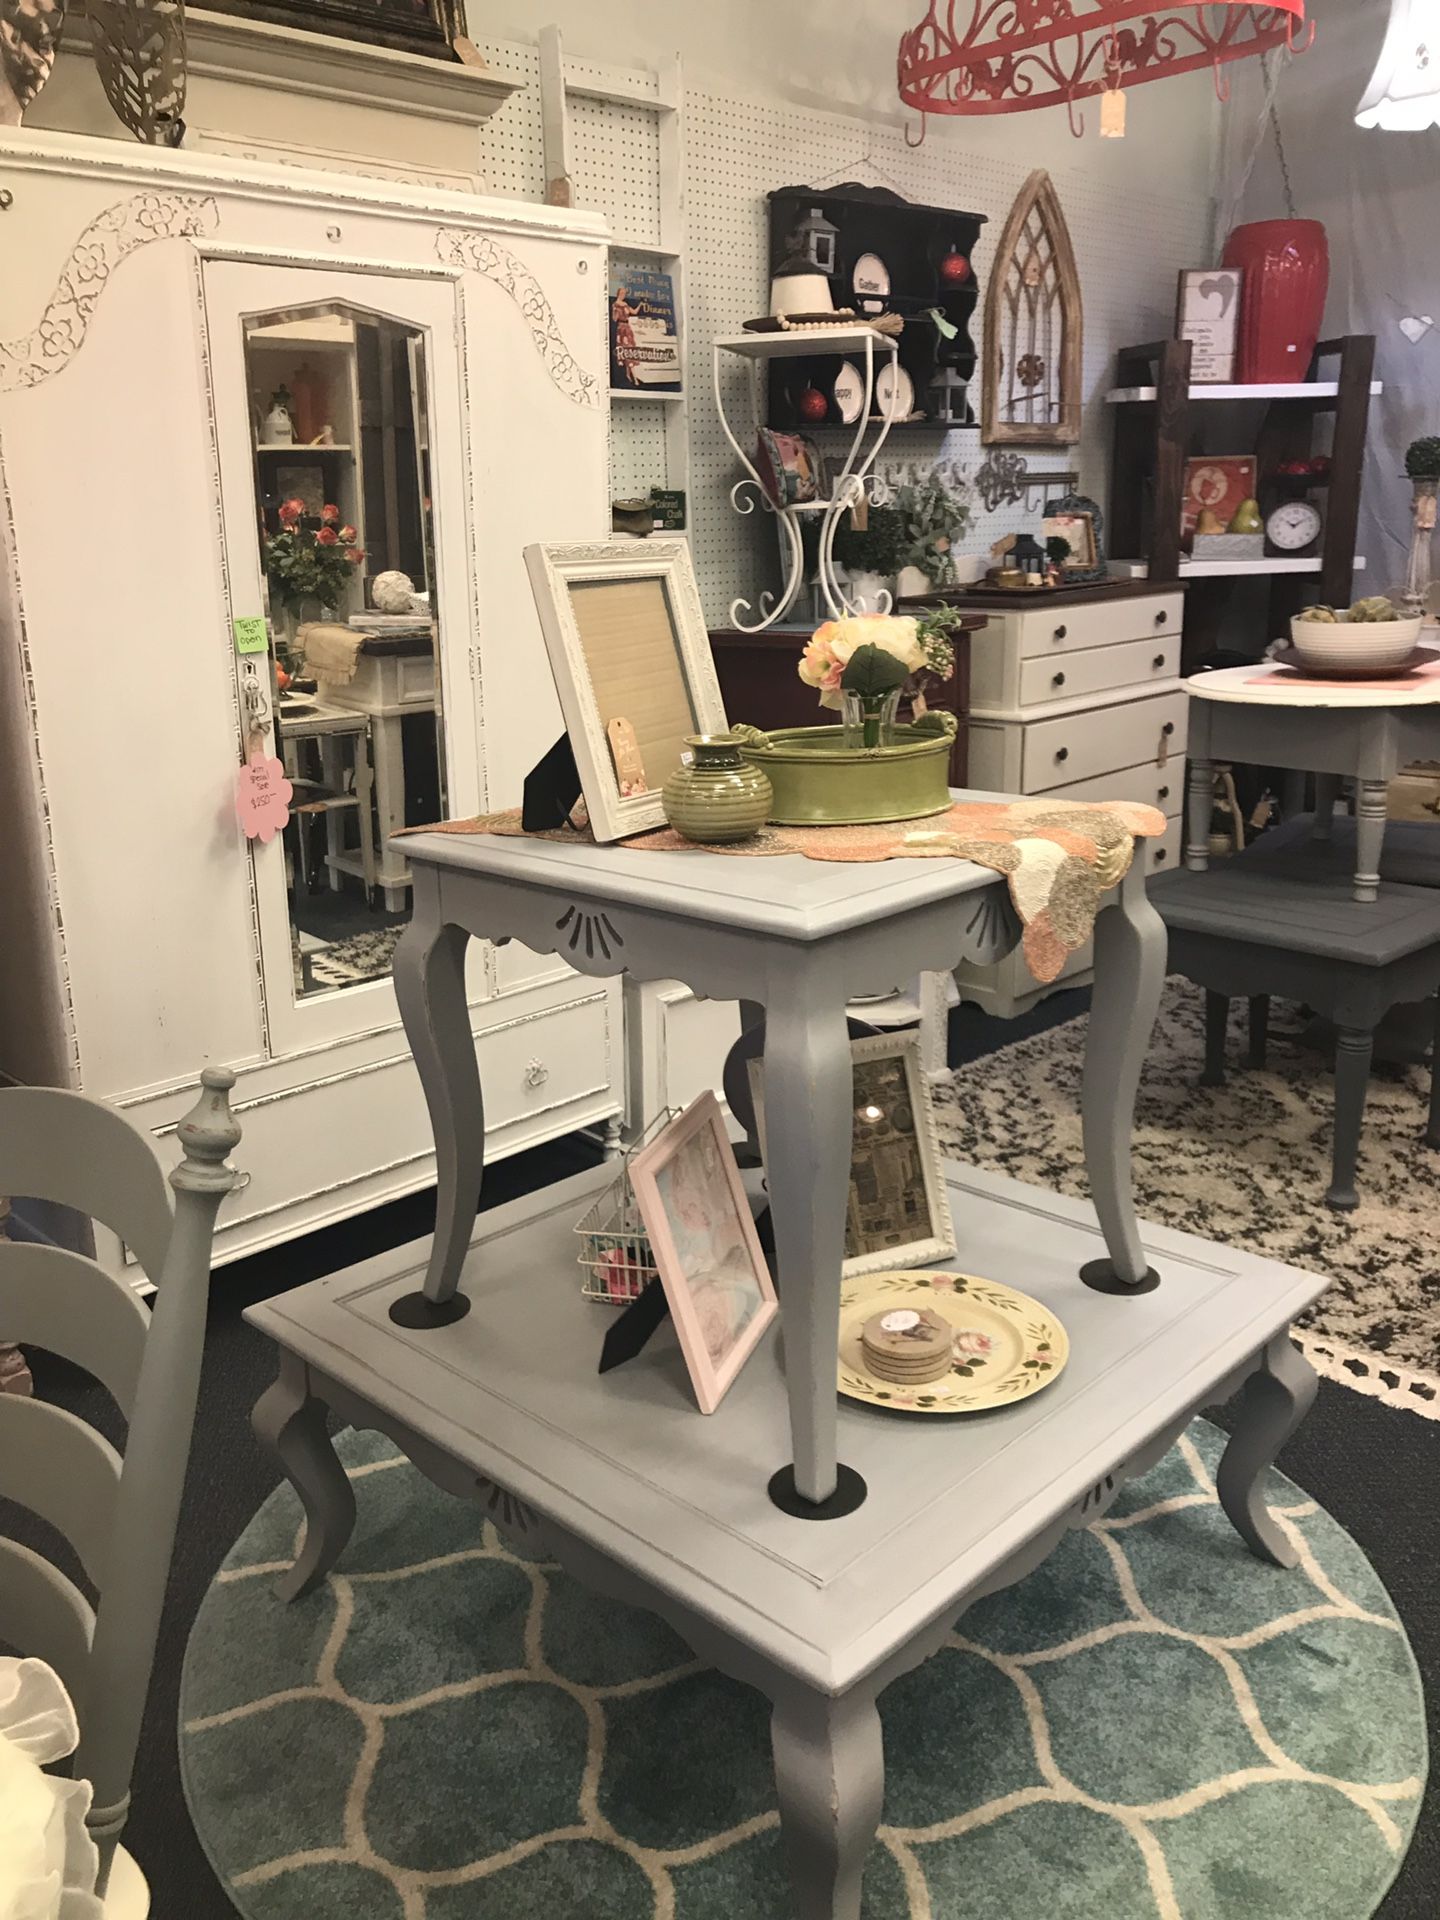 2 pc set gray coffee table with matching said table located inside vintage holes 803 w roseburg Ave Modesto ca Open 10-5 sundays 11-4